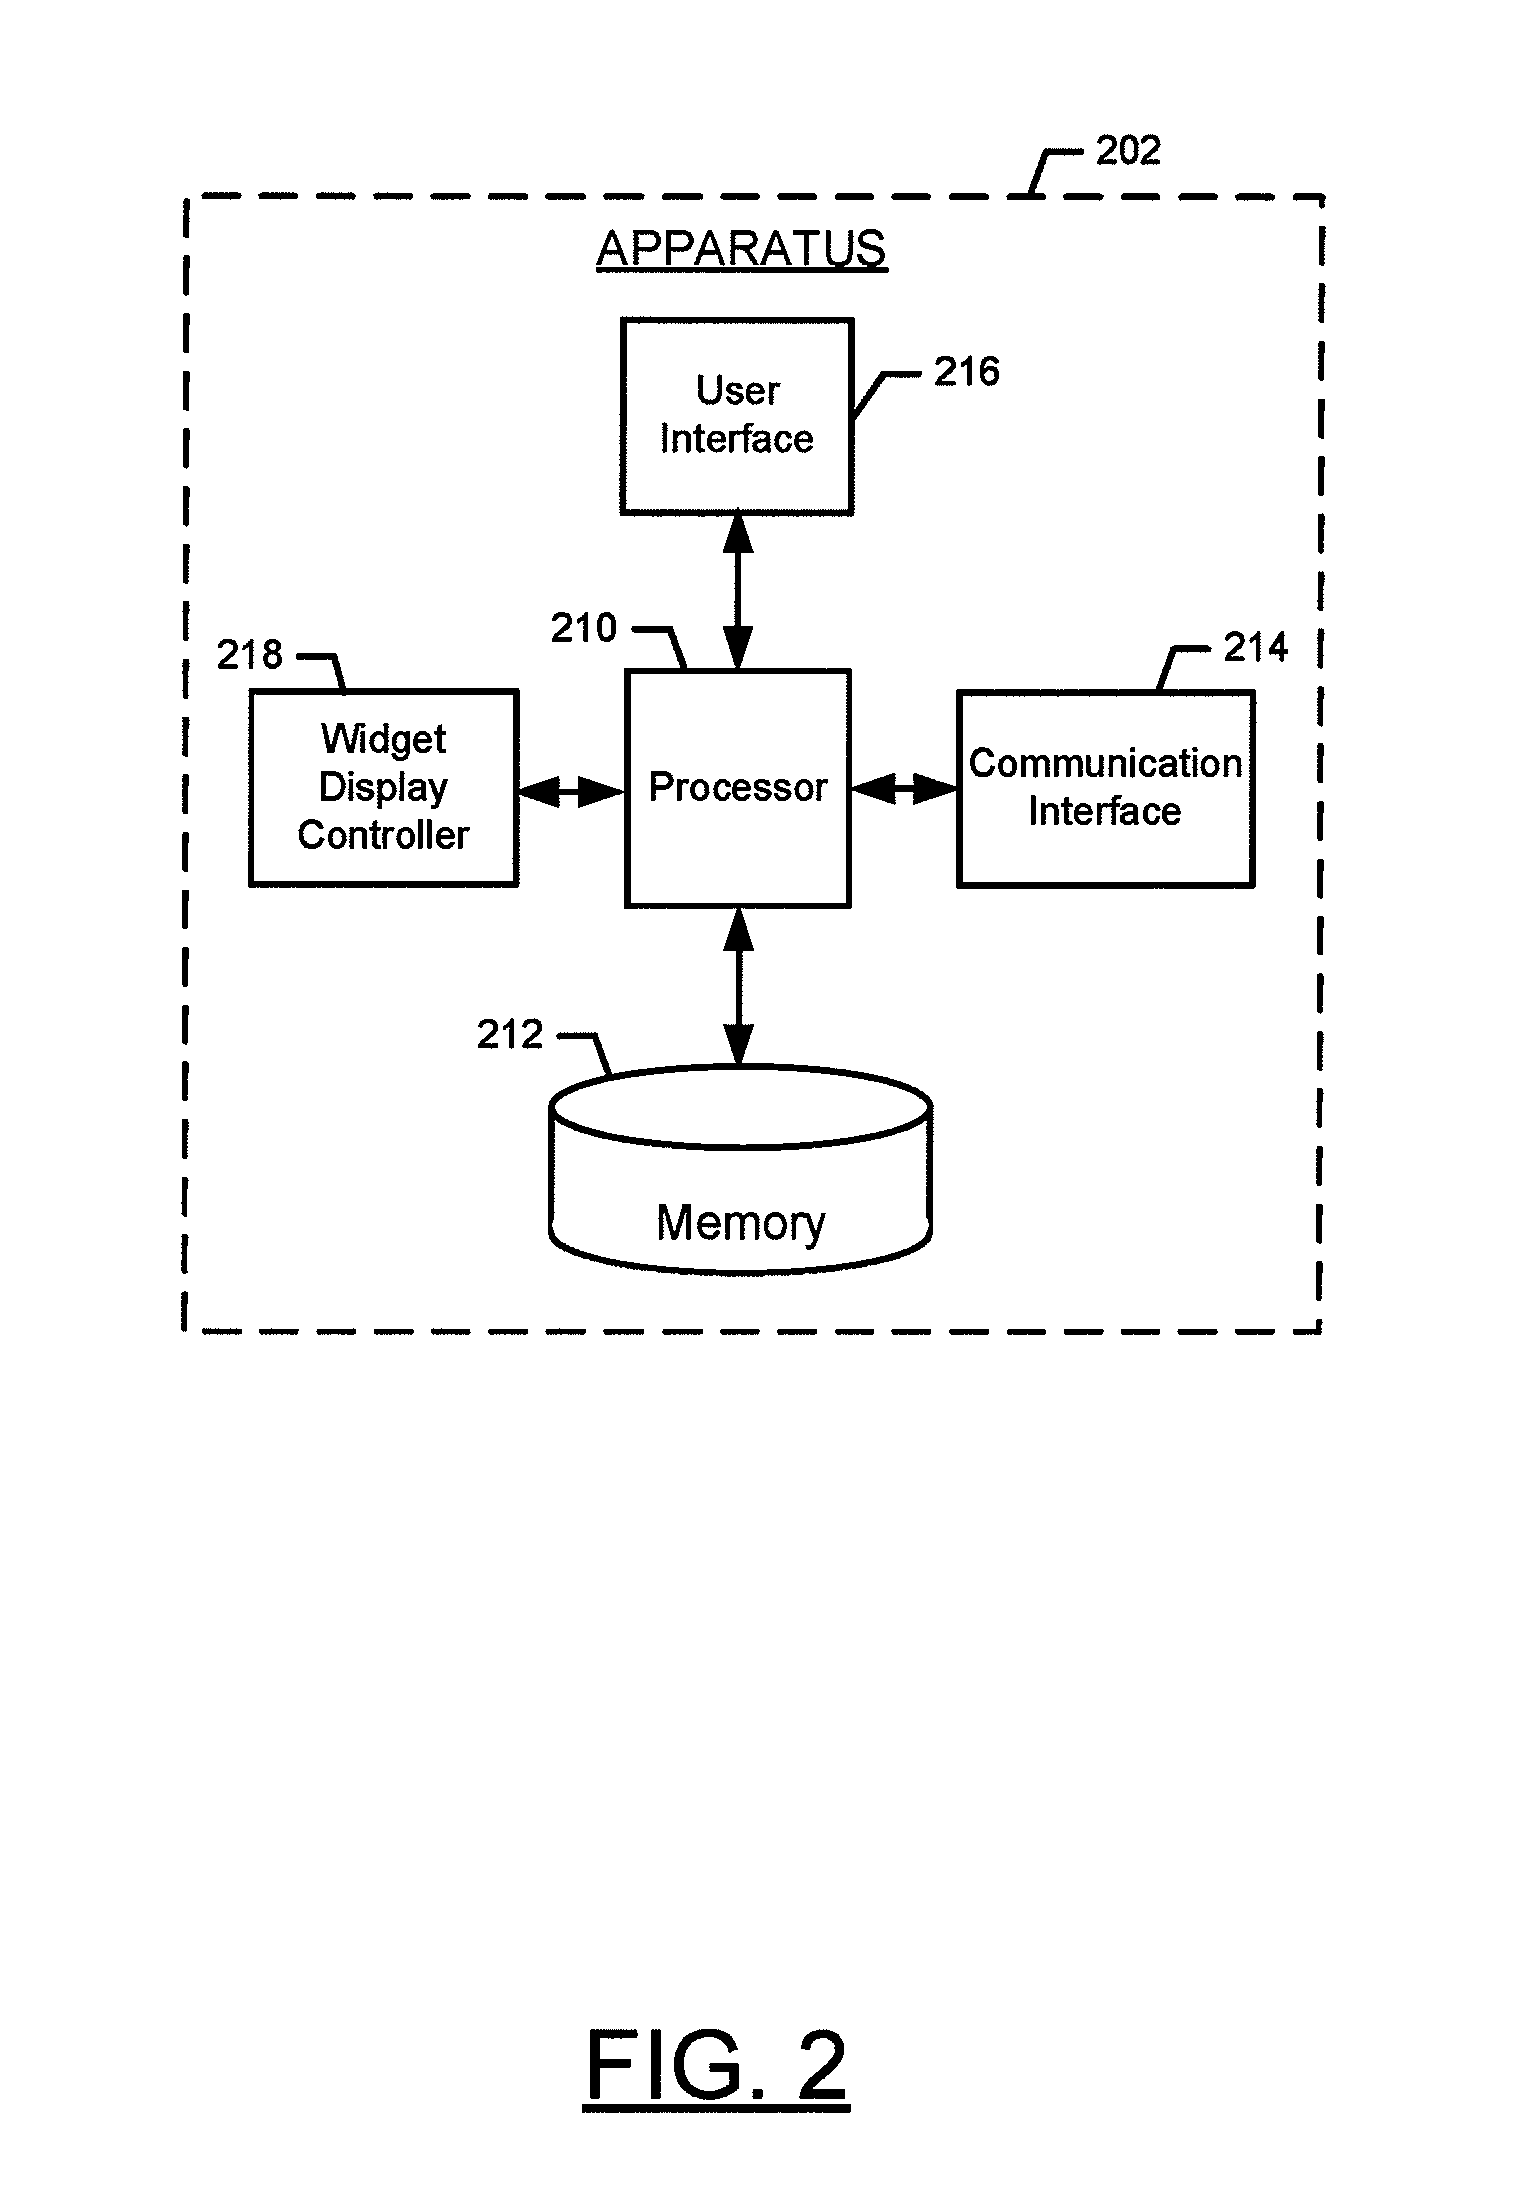 Methods and apparatuses for facilitating management of widgets